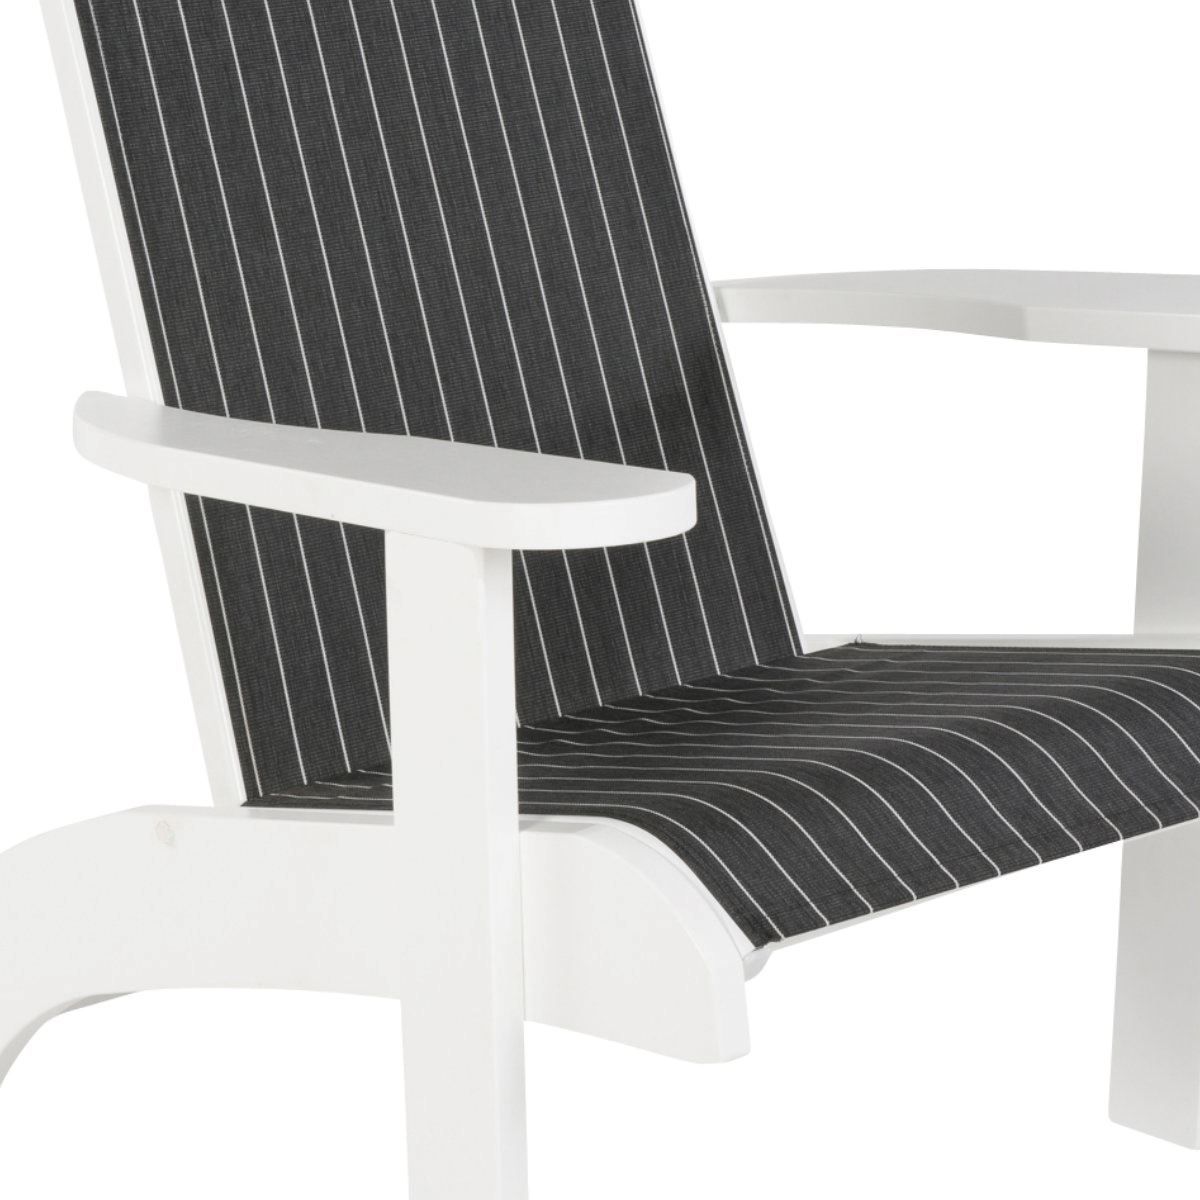 2020 Reclining Sling Lounge Chairs Regarding Reclining Sling Adirondack Chair With Marine Grade Polymer Frame, 35 Lbs (View 25 of 25)